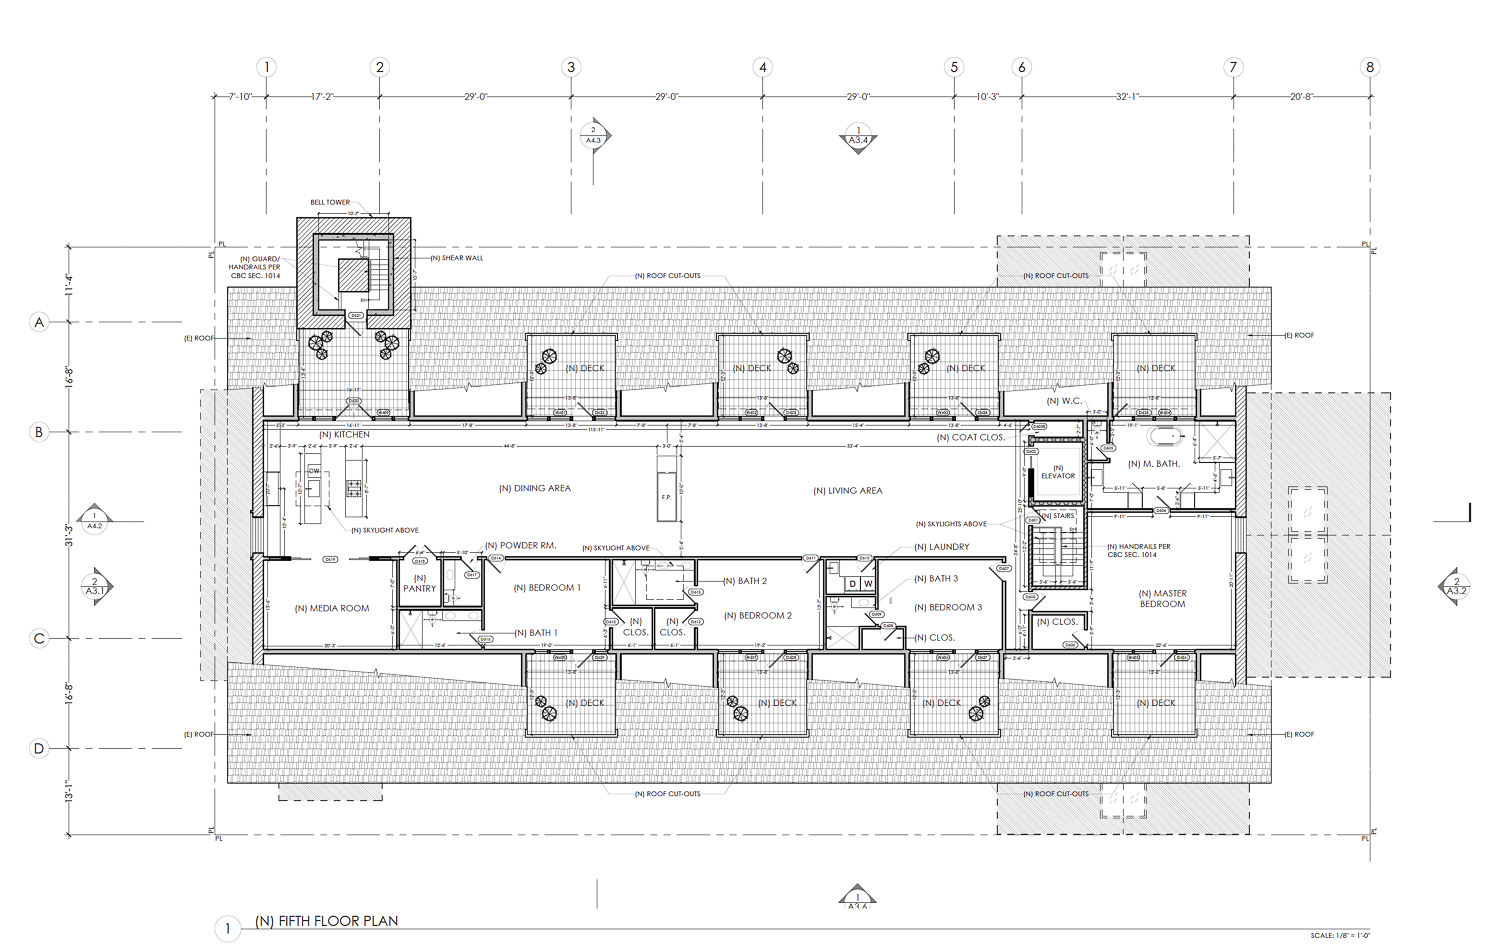 554 Fillmore Street fifth-floor penthouse floor plan, illustration by Architects SF